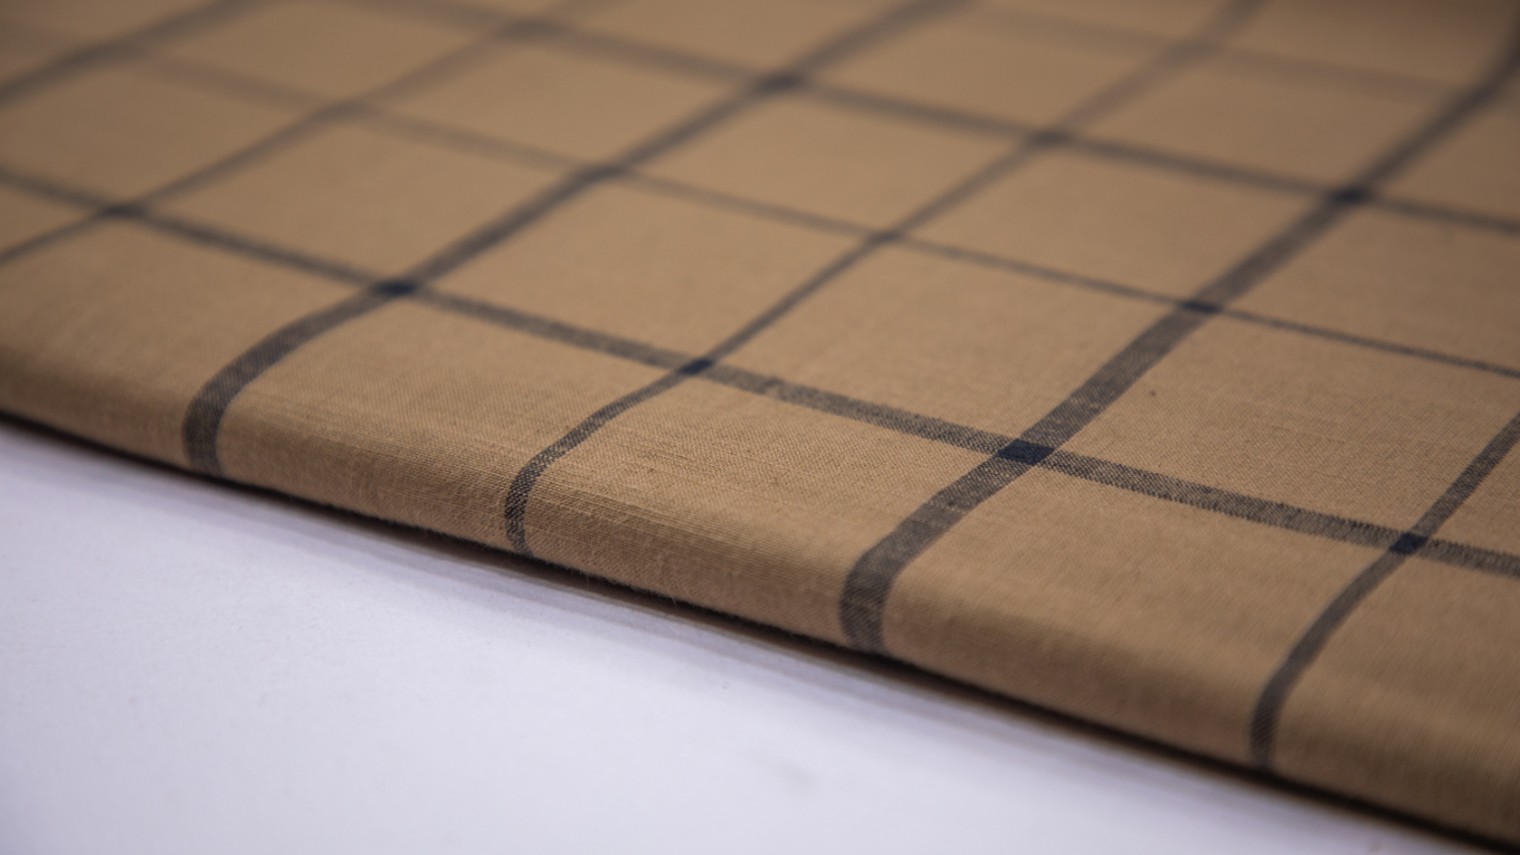 NUTS BROWN COLOR SOUTH COTTON HANDLOOM BLACK CHEX WEAVE FABRIC - 4284